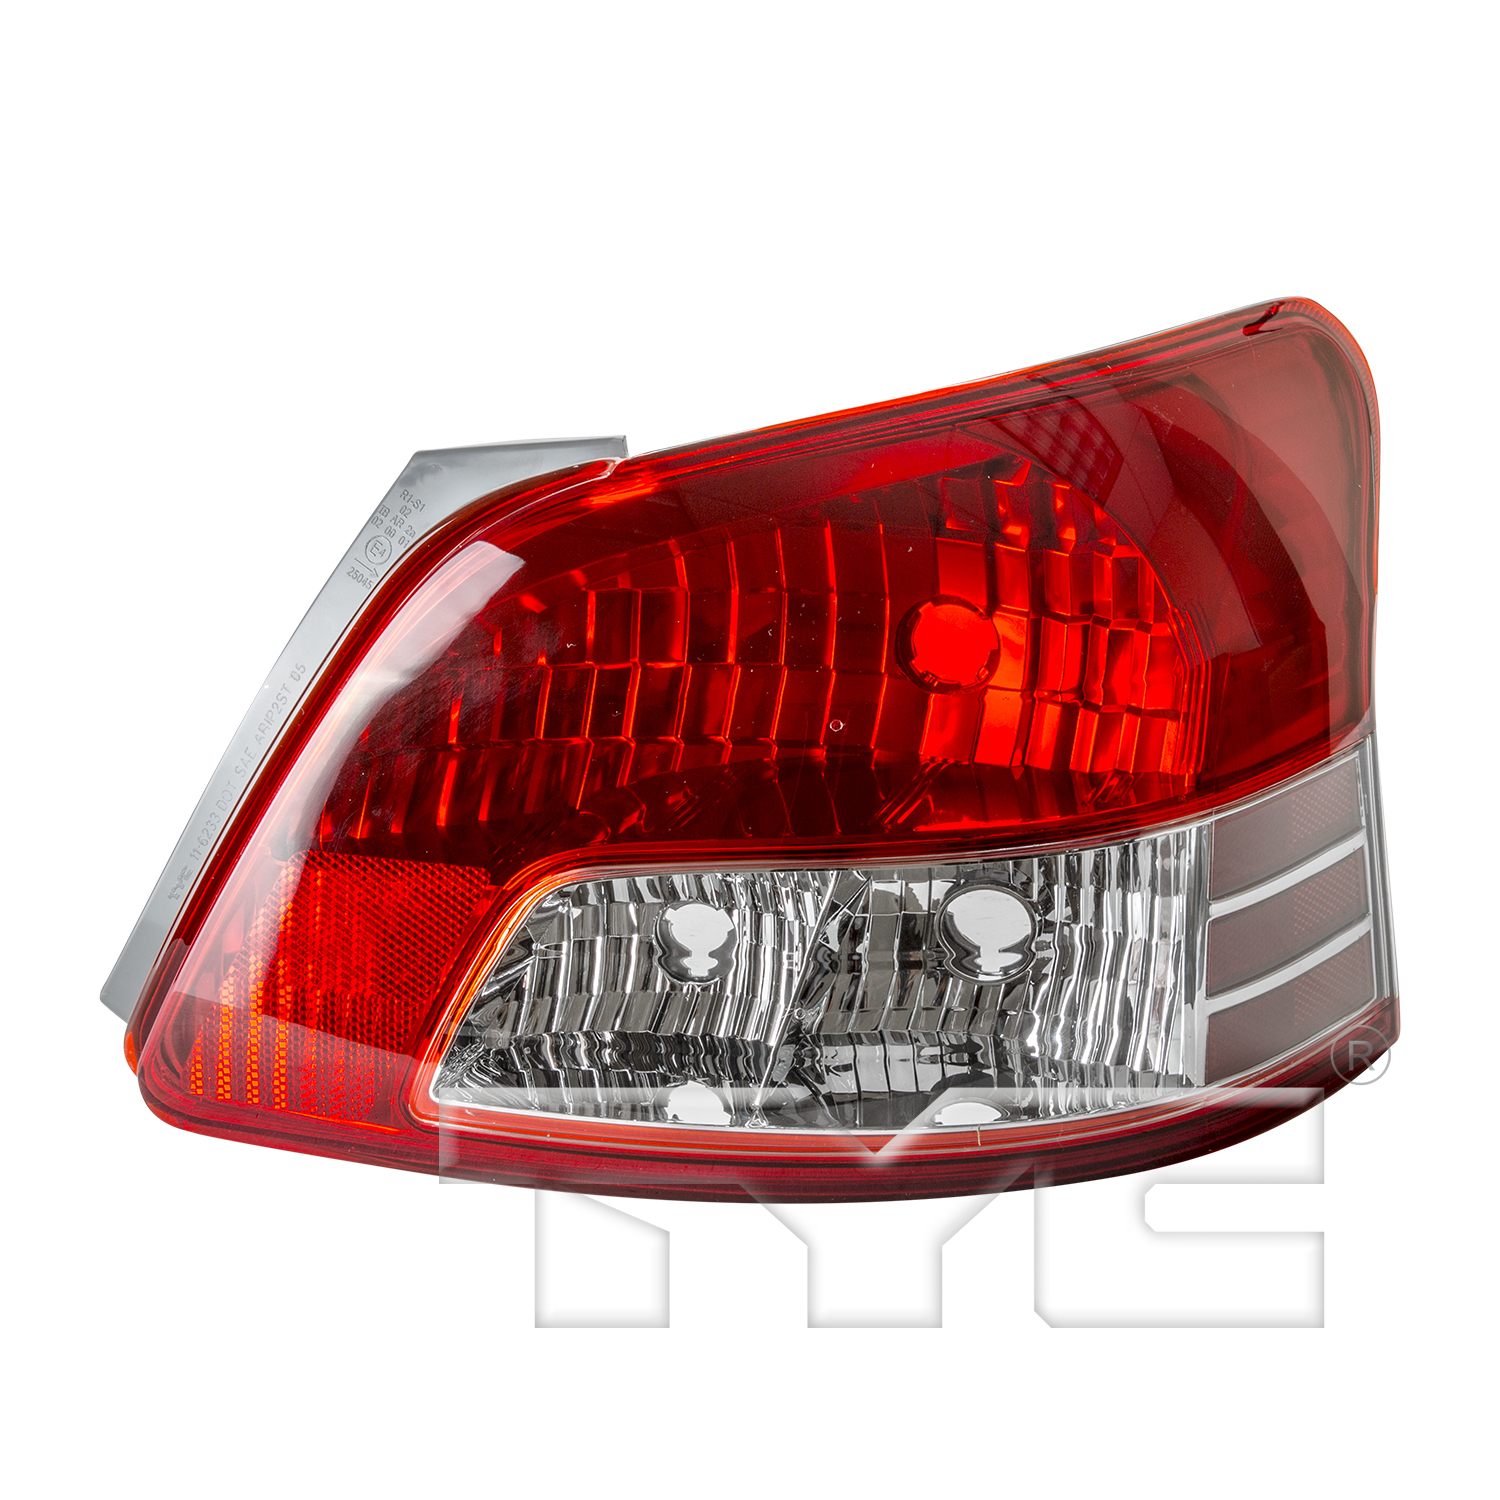 Aftermarket TAILLIGHTS for TOYOTA - YARIS, YARIS,07-11,RT Taillamp lens/housing